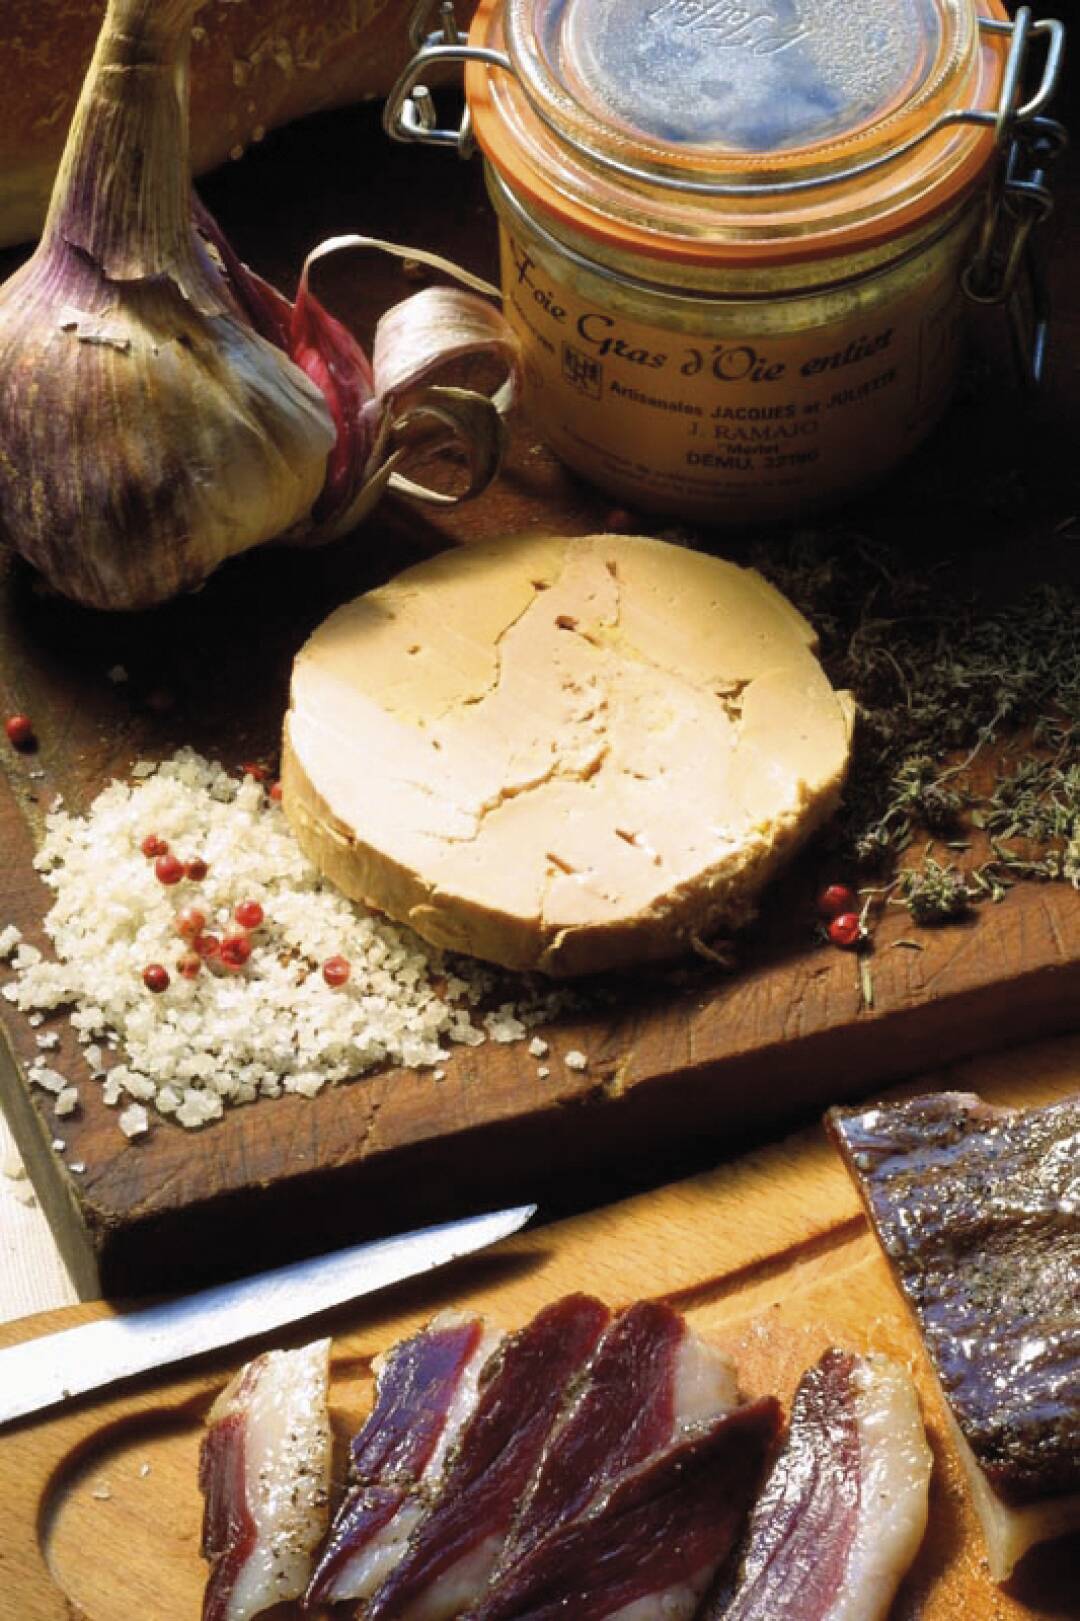 The gastronomy of the Gers and P&eacute;rigord: The gastronomy of the Gers and P&eacute;rigord is exceptional. The local products and specialities have an inimitable flavour, such as foie gras, confits, duck breast, truffles, Bergerac wines and cheese (Trappe d&#39;Echourgnac)